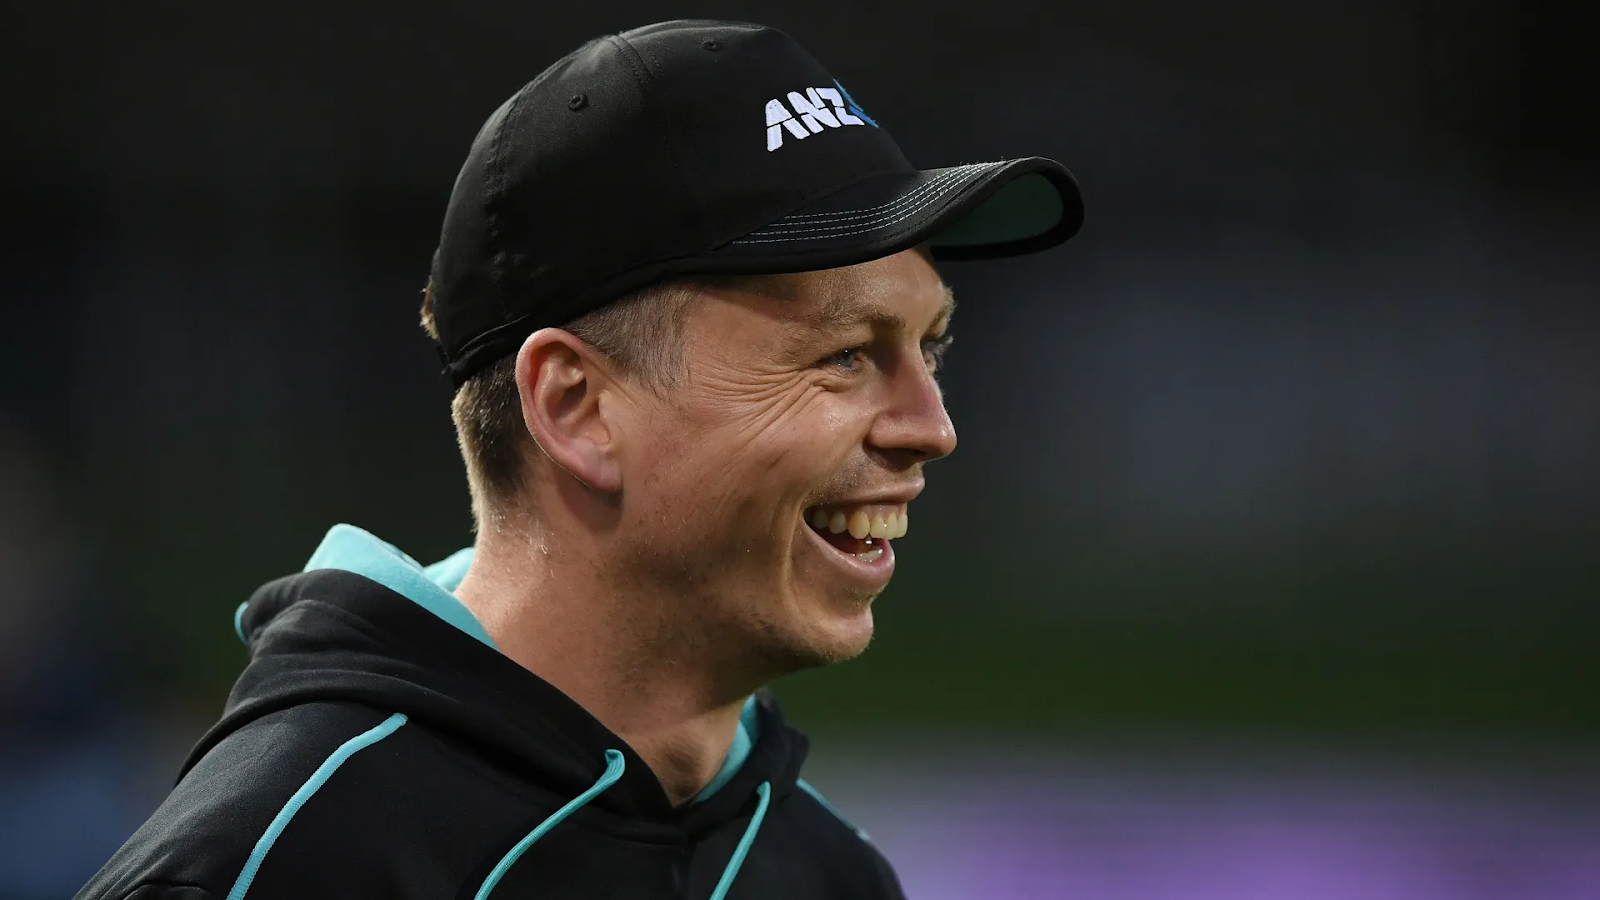 Records tumble as Bracewell saves New Zealand in Ireland. With 24 runs off the final over, Michael Bracewell led the way as New Zealand beat Ireland 